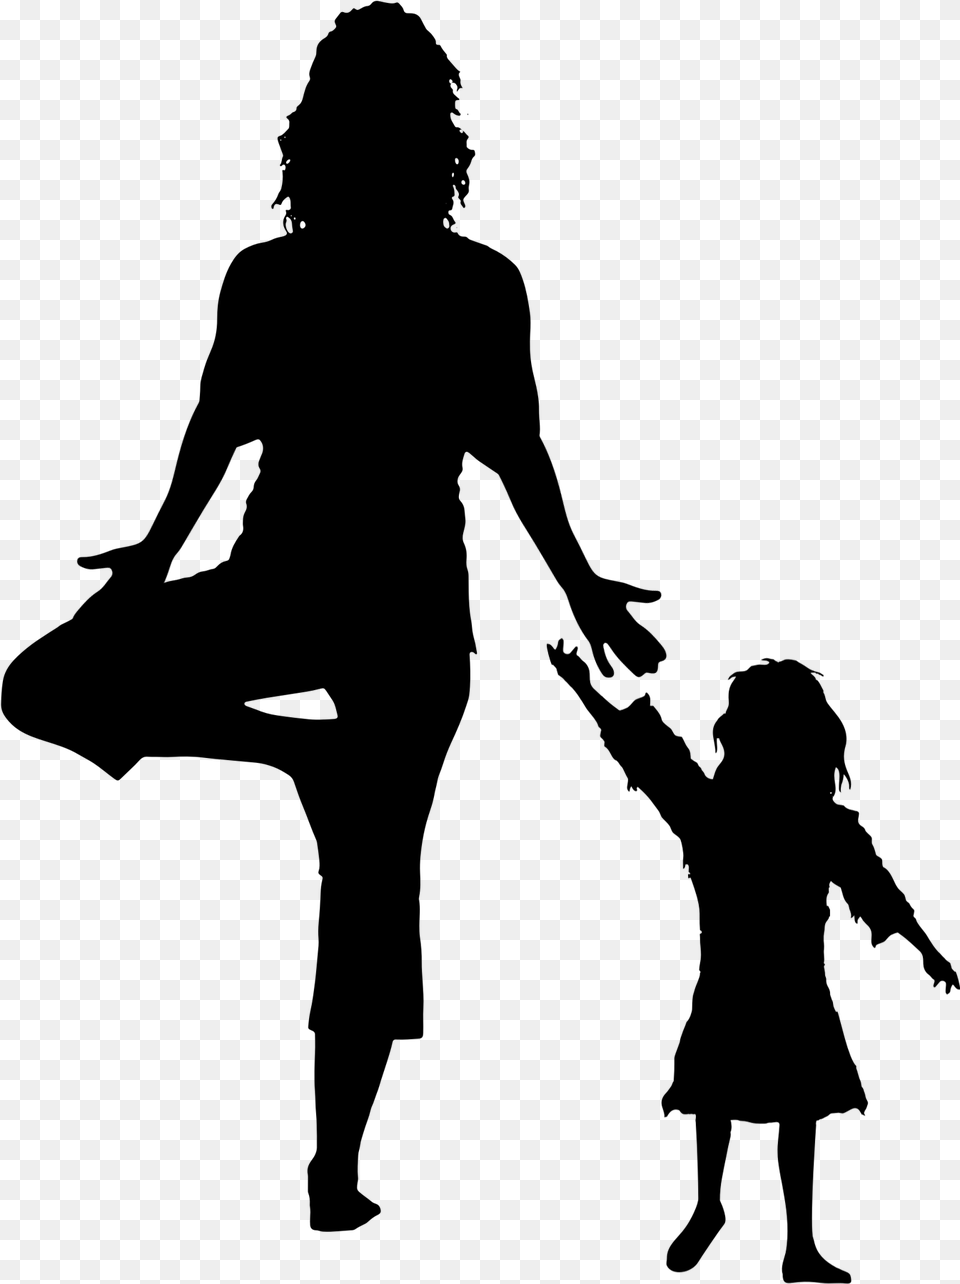 Yoga Clipart Family For Mommy And Me Yoga Silhouette, Gray Png